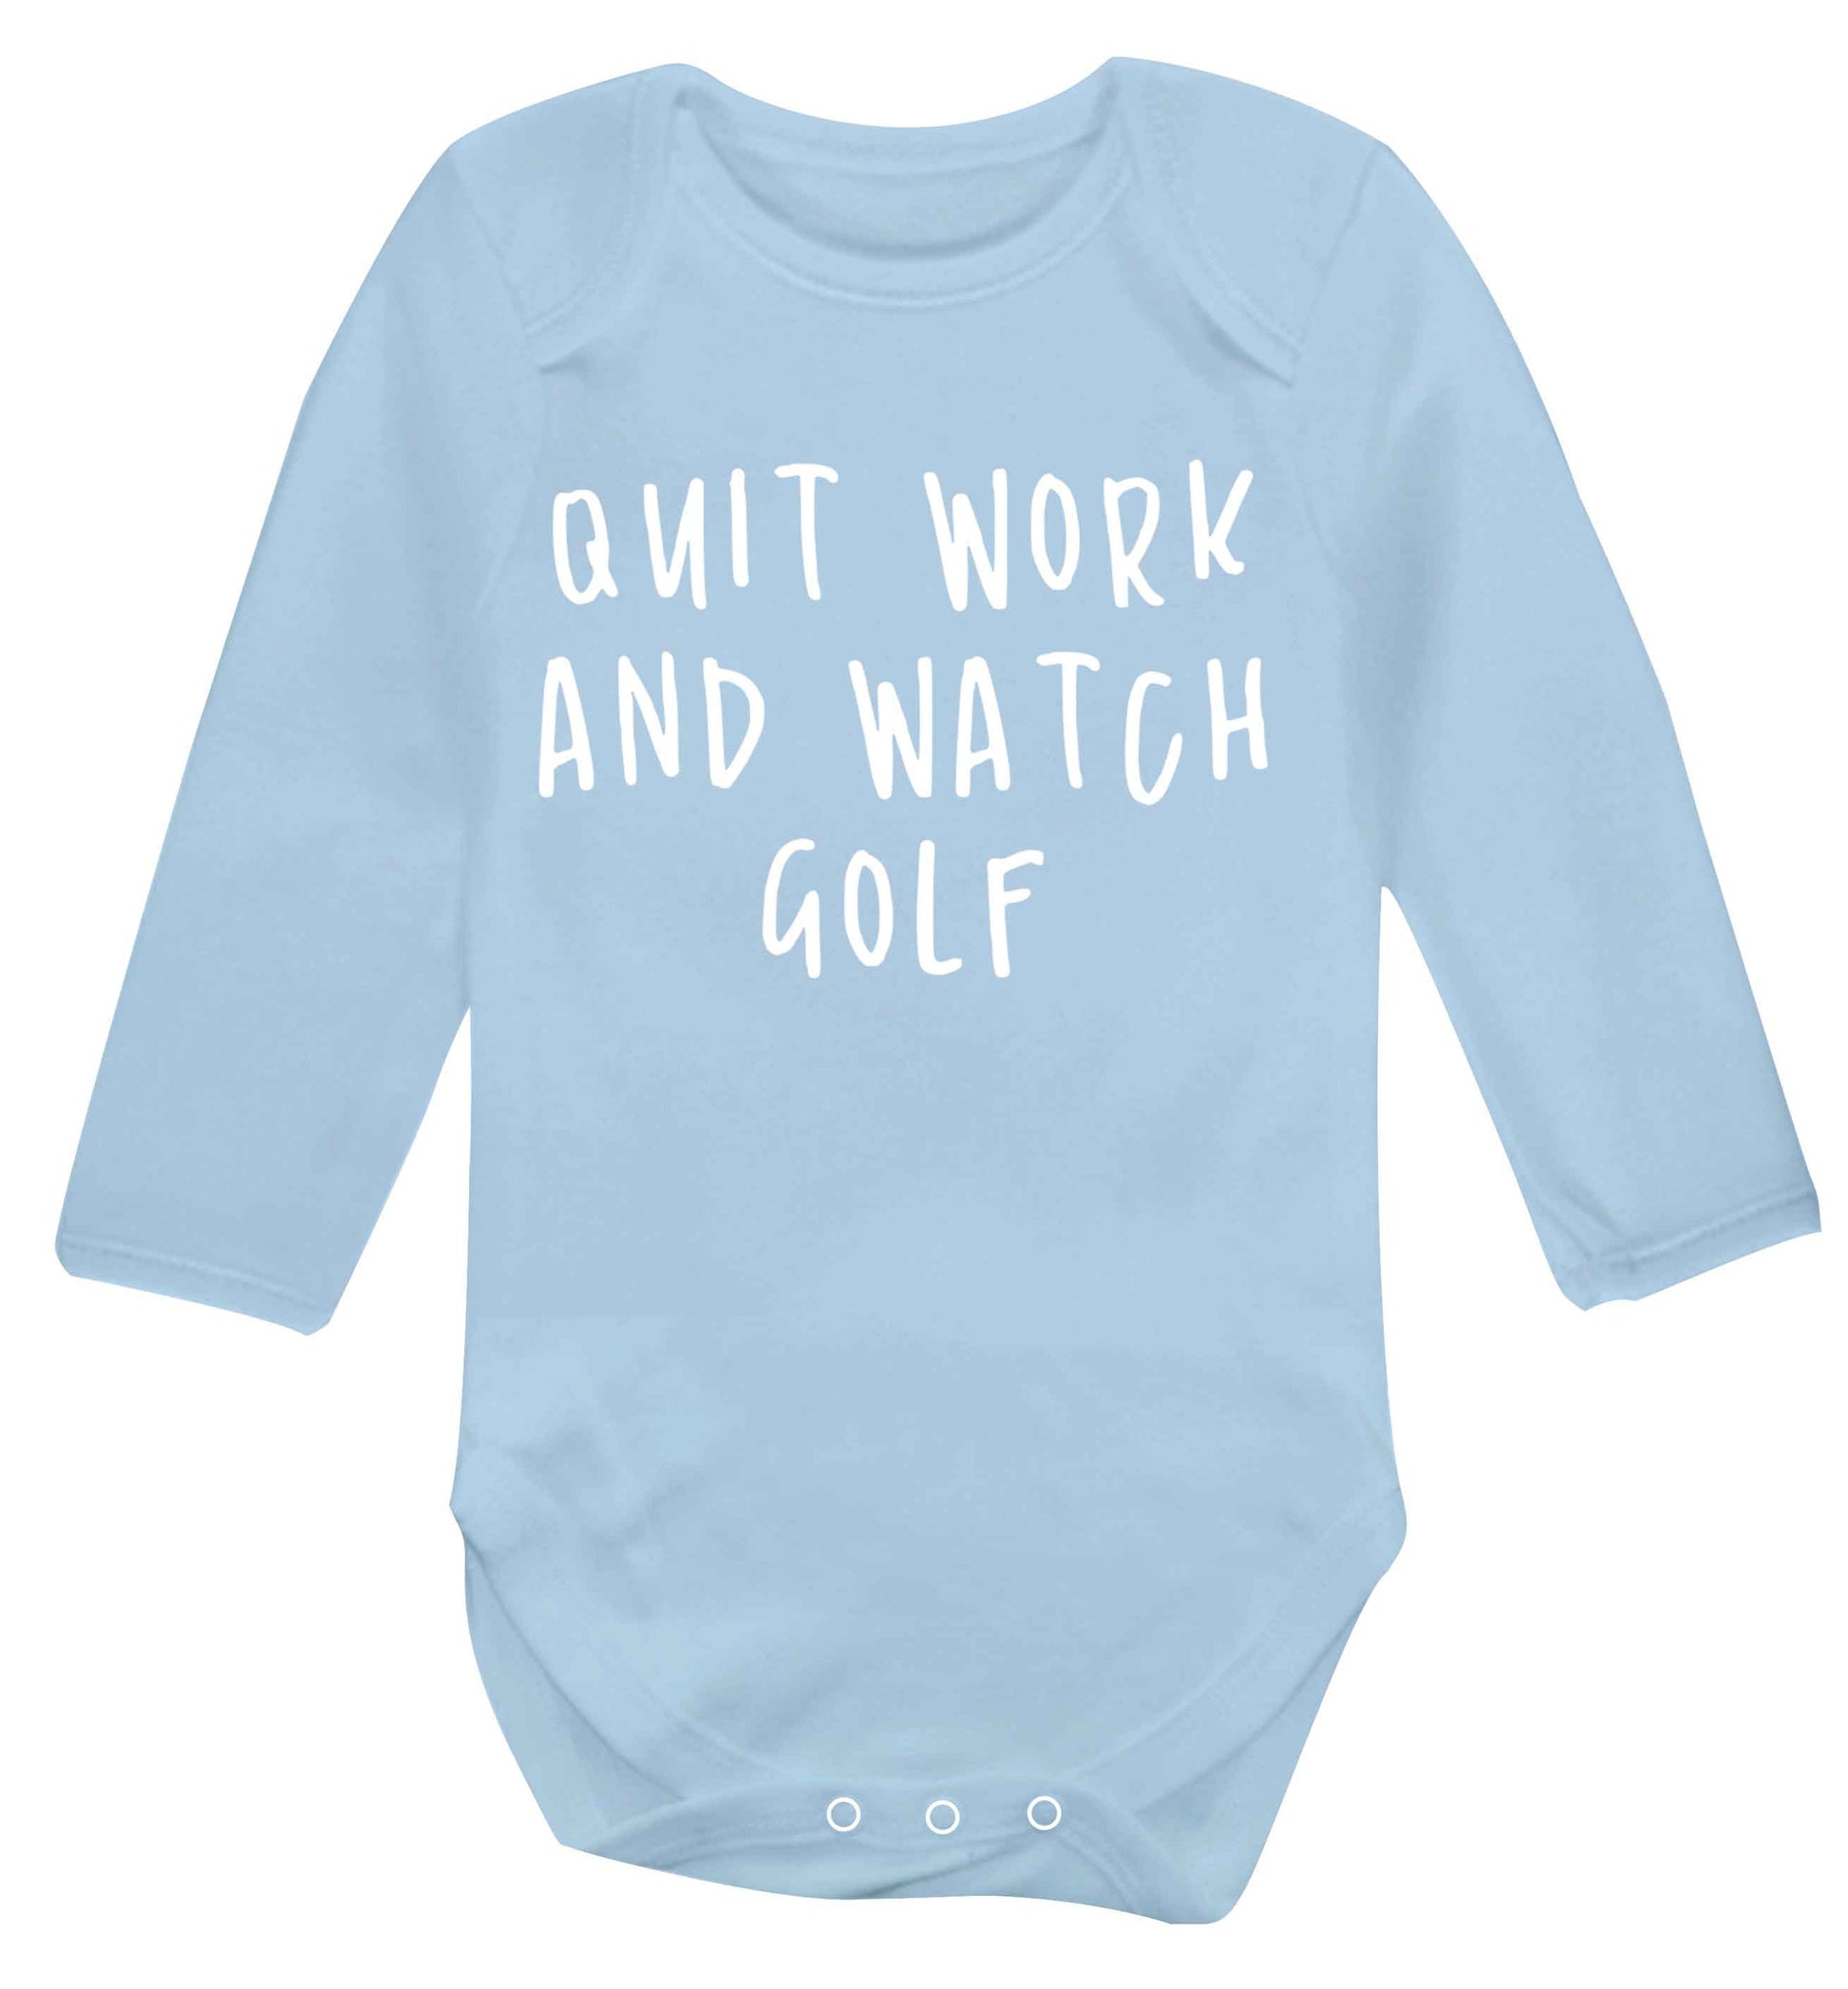 Quit work and watch golf Baby Vest long sleeved pale blue 6-12 months